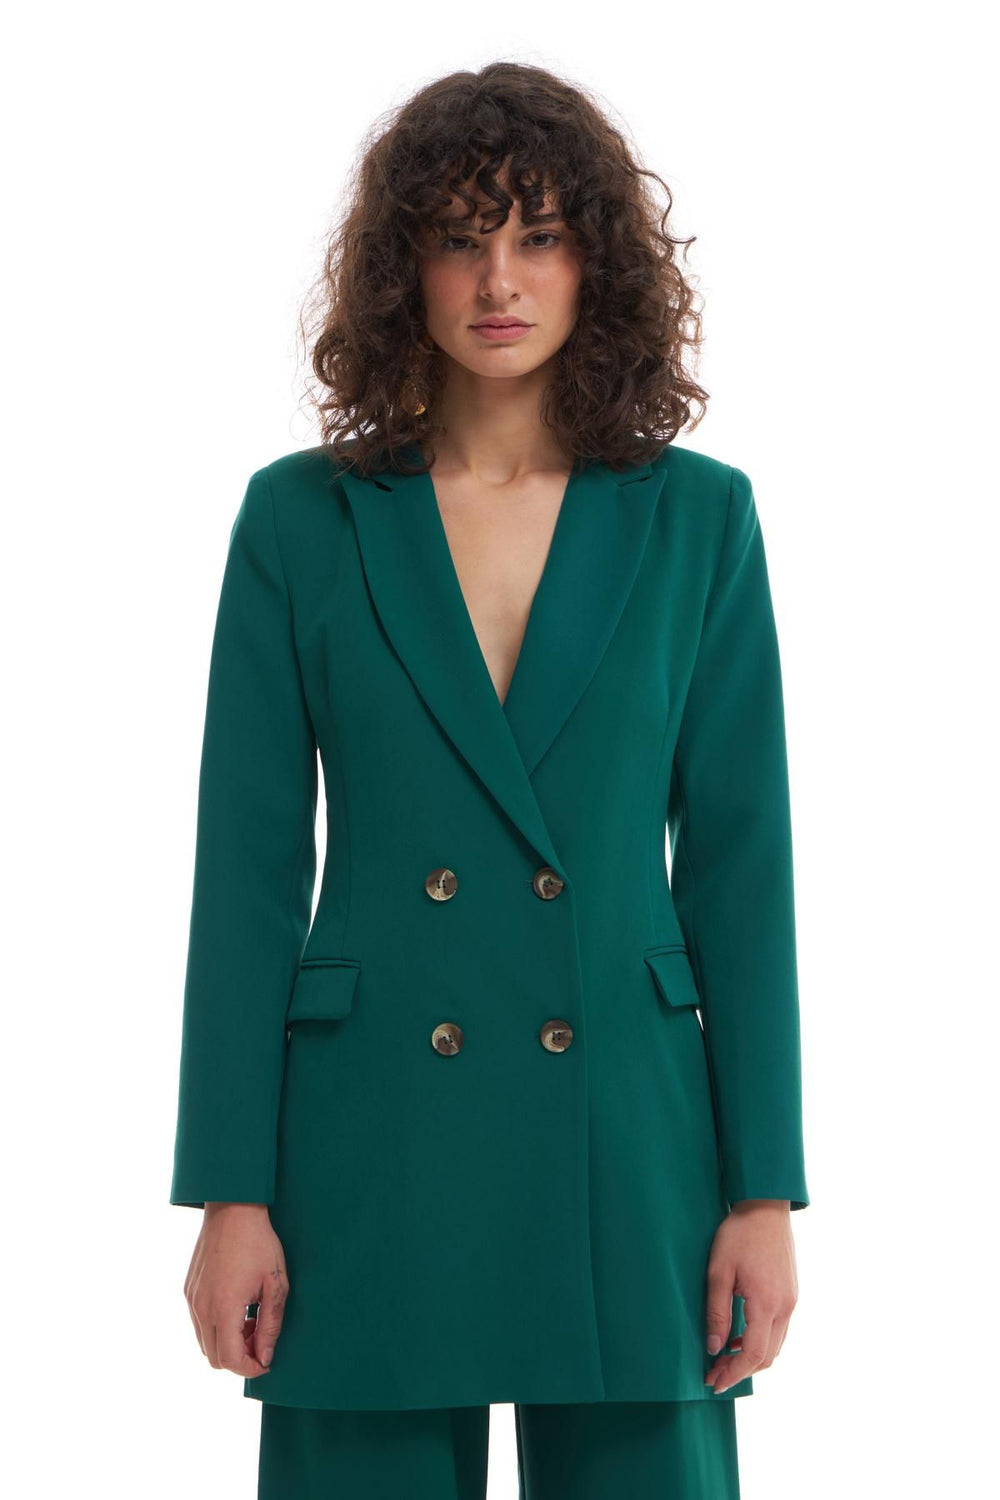 Double Breasted Collar Jacket Dress Dark Green